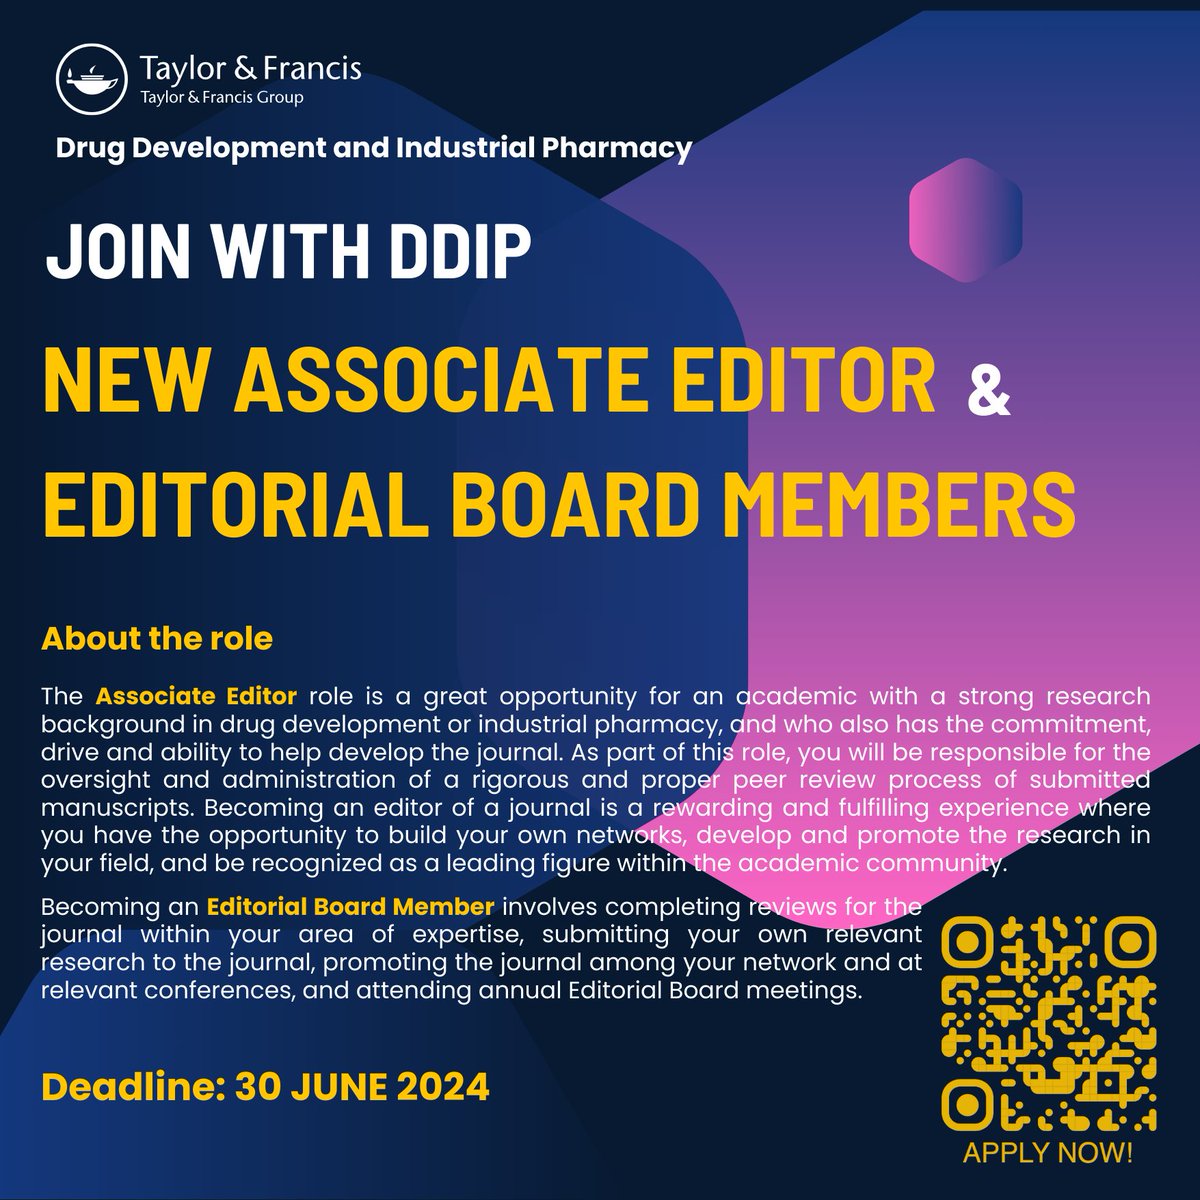 📢Calling all experts in drug development! @DDIPJournal is seeking a new Associate Editor and Editorial Board Members. Join a leading journal in the field. 📨Apply now! think.taylorandfrancis.com/editor_recruit… #DrugDevelopment #IndustrialPharmacy #EditorialOpportunity